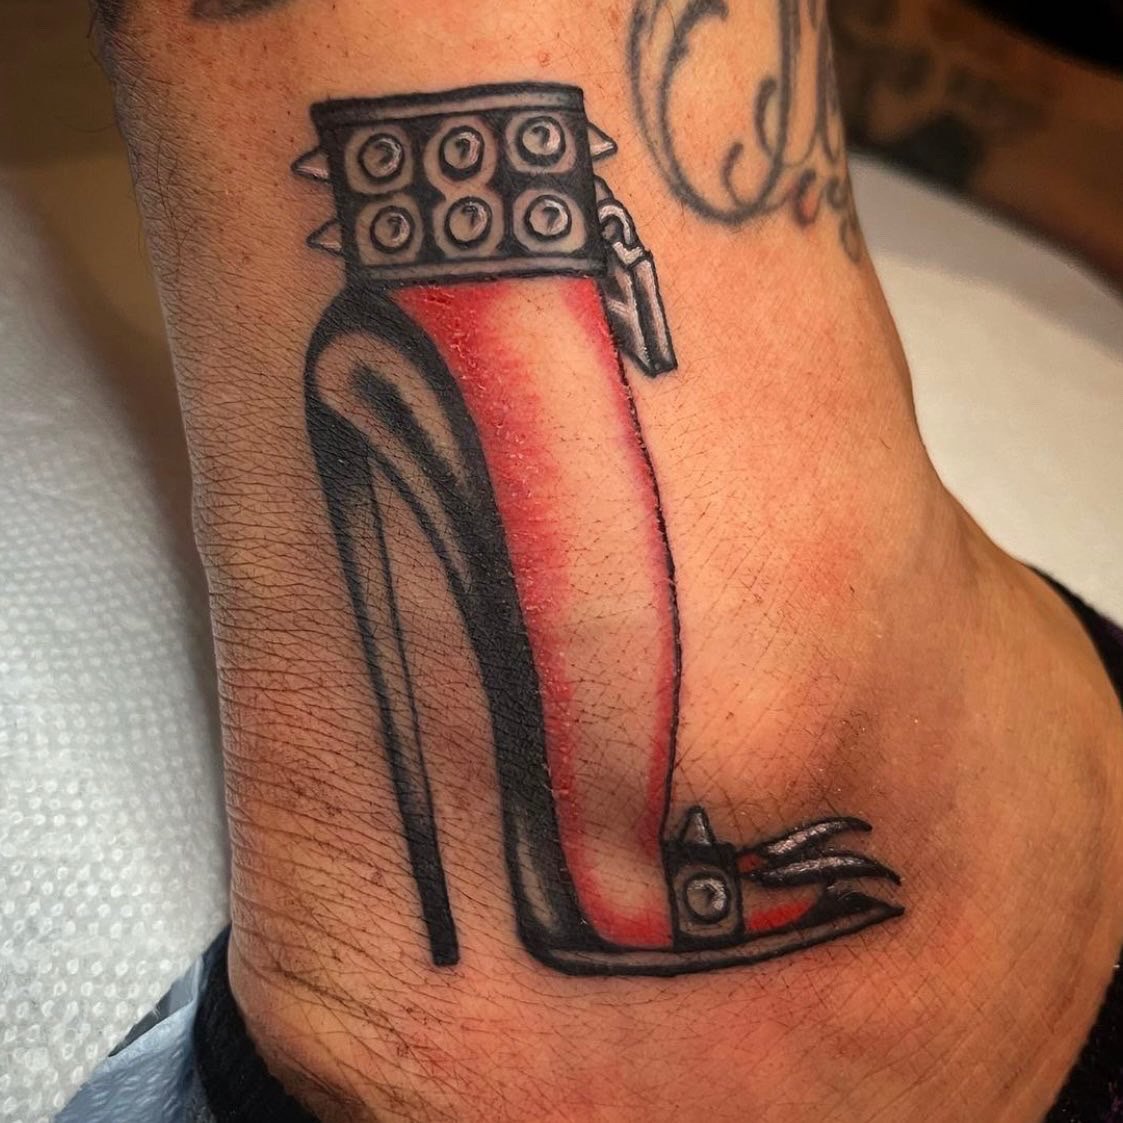 RIDGID Tools  A closer look at Charlies pipewrench tattoo Nice detail   Facebook